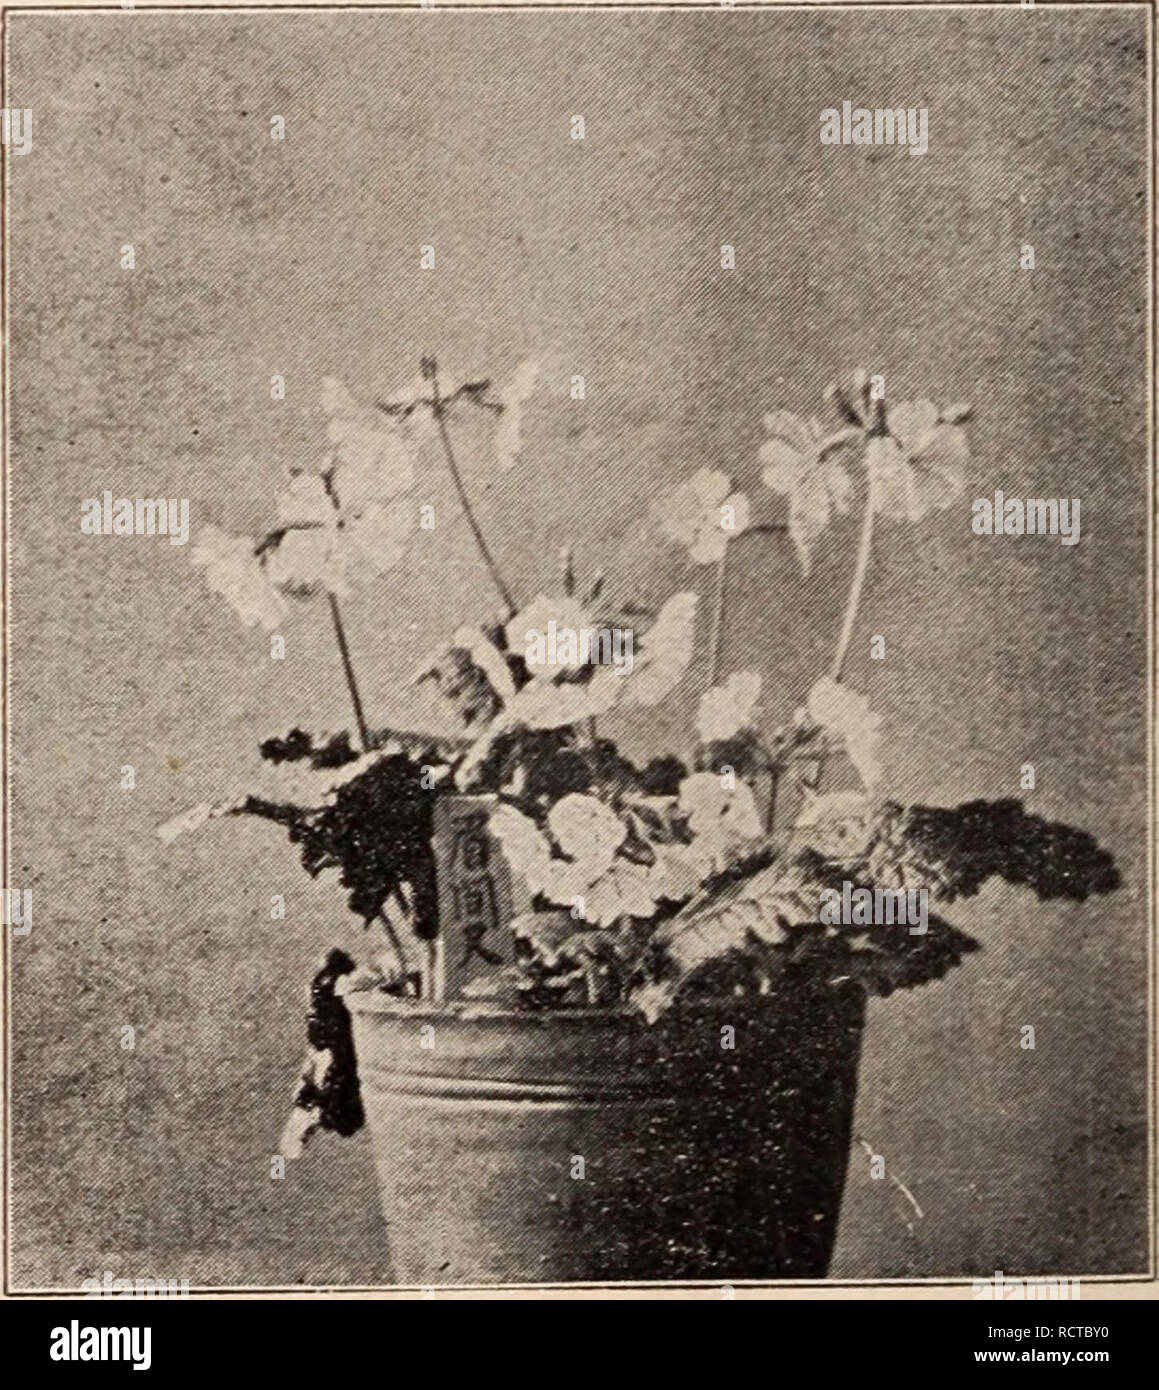 . Descriptive catalogue of flowering, ornamental trees, shrubs, bulbs, herbs, climbers, fruit trees, &amp;c., &amp;c., &amp;c. / for sale by the Yokohama Nursery Co., Limited.. Nursery Catalogue. INDIGOFERA DECORA. Conaiidron ramondioides, purple flower, large leaves growing in shady and rocky place—per 10, 90 c. ; per 100, $80,00. CoiiOj)hallus Koujak, splendid ornamental tuber- ous plant, flower, with enormous spadix, gela- tinous food stuff is made from its tubers—per 10, $1.00. Coptis bracliypotala,—per 10, 35c., per 100, $3.00. Dicontra spectahiiis, showy perennial pink flowering herb—per Stock Photo